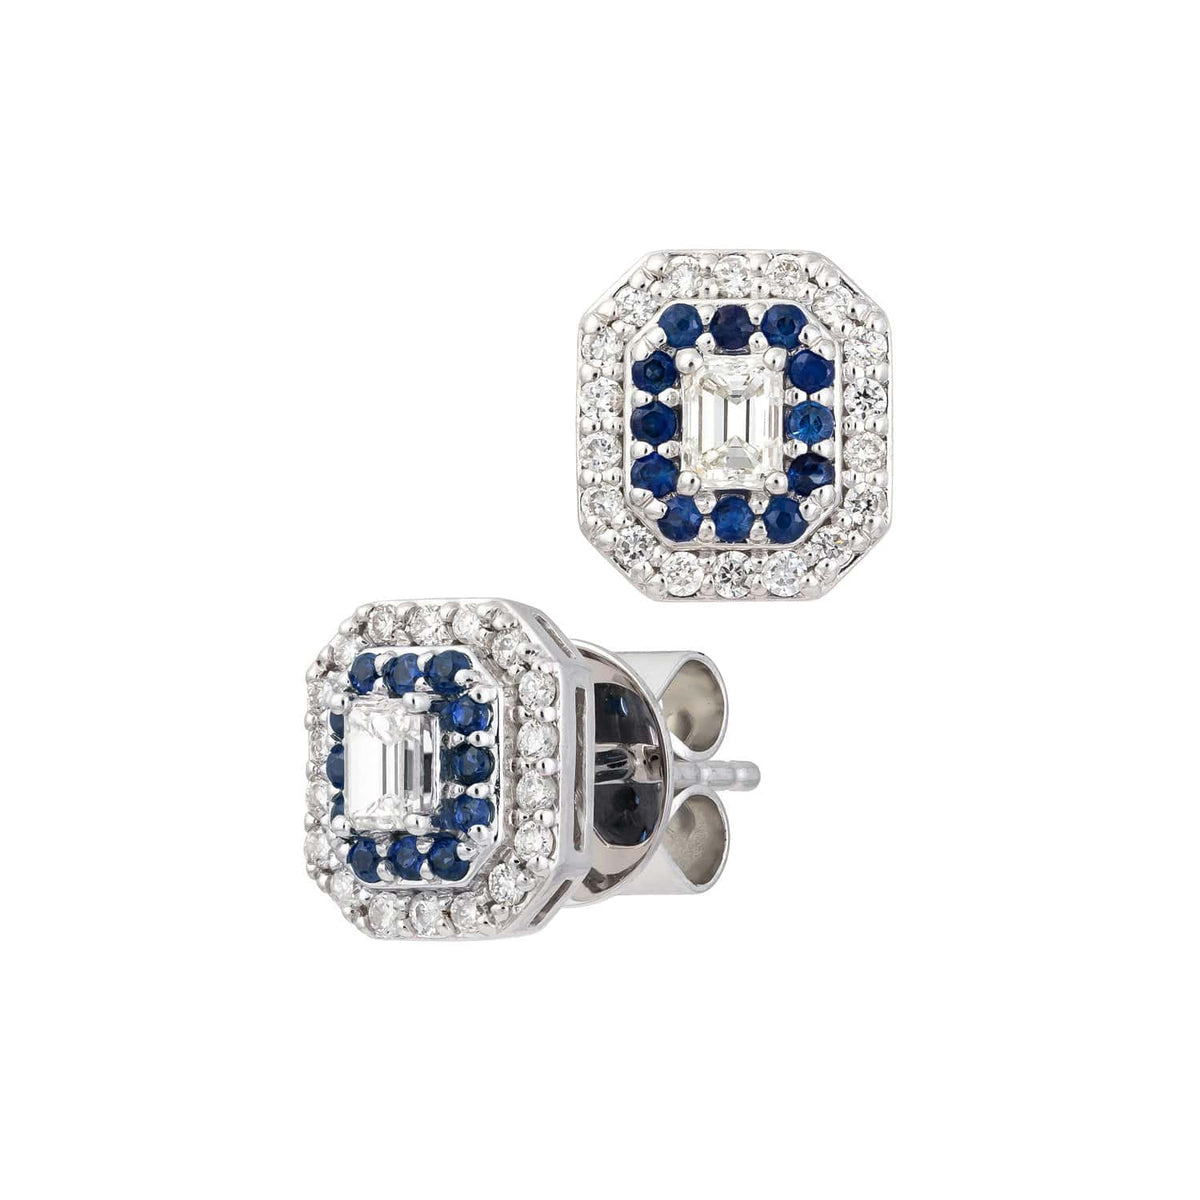 18ct White Gold Diamond and Sapphire Earrings